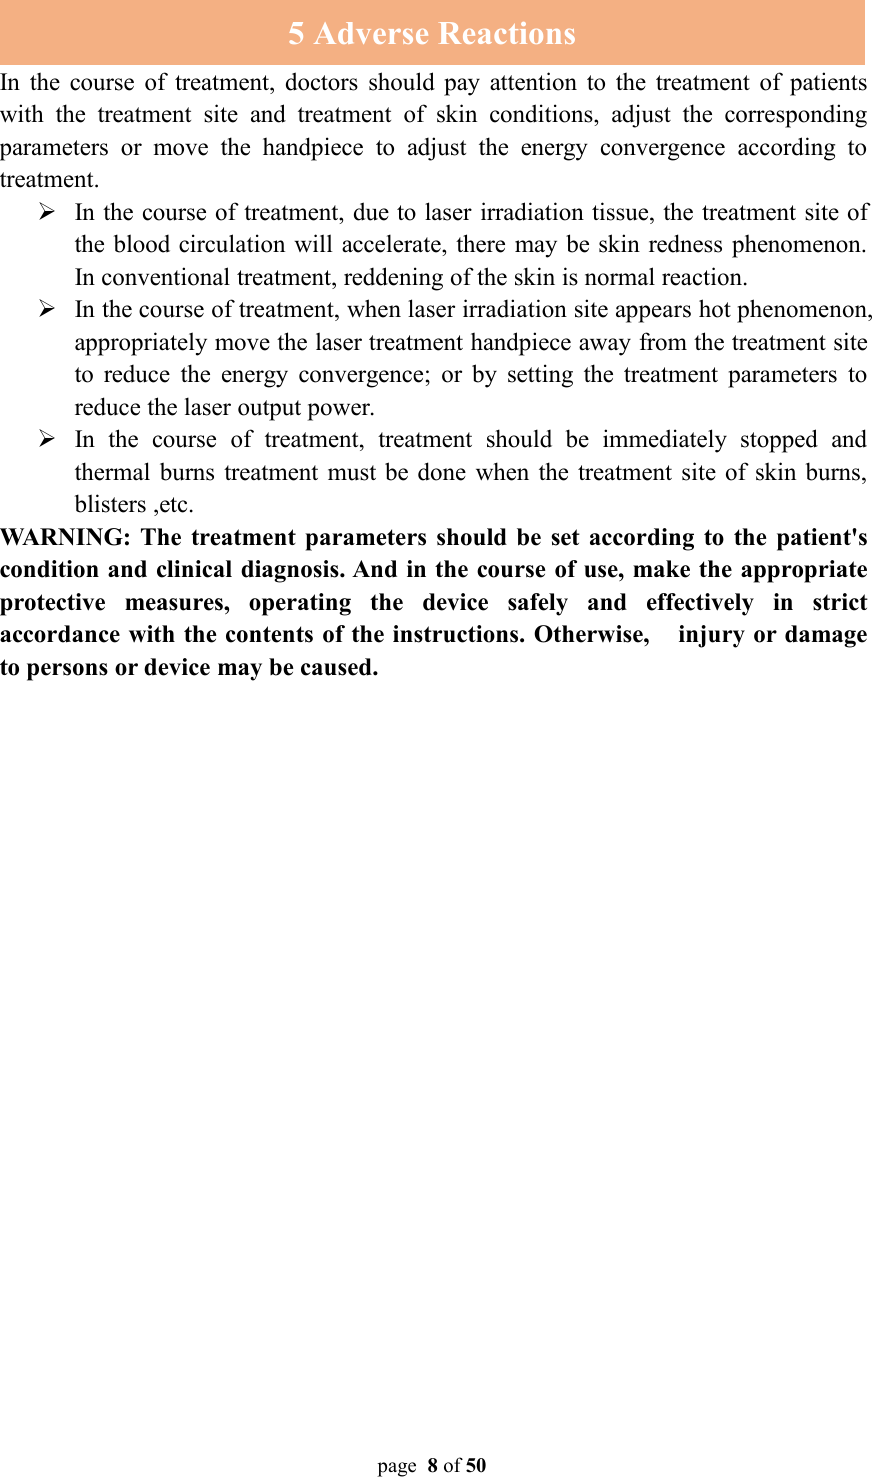 page 8of 505 Adverse ReactionsIn the course of treatment, doctors should pay attention to the treatment of patientswith the treatment site and treatment of skin conditions, adjust the correspondingparameters or move the handpiece to adjust the energy convergence according totreatment.In the course of treatment, due to laser irradiation tissue, the treatment site ofthe blood circulation will accelerate, there may be skin redness phenomenon.In conventional treatment, reddening of the skin is normal reaction.In the course of treatment, when laser irradiation site appears hot phenomenon,appropriately move the laser treatment handpiece away from the treatment siteto reduce the energy convergence; or by setting the treatment parameters toreduce the laser output power.In the course of treatment, treatment should be immediately stopped andthermal burns treatment must be done when the treatment site of skin burns,blisters ,etc.WARNING: The treatment parameters should be set according to the patient&apos;scondition and clinical diagnosis. And in the course of use, make the appropriateprotective measures, operating the device safely and effectively in strictaccordance with the contents of the instructions. Otherwise, injury or damageto persons or device may be caused.